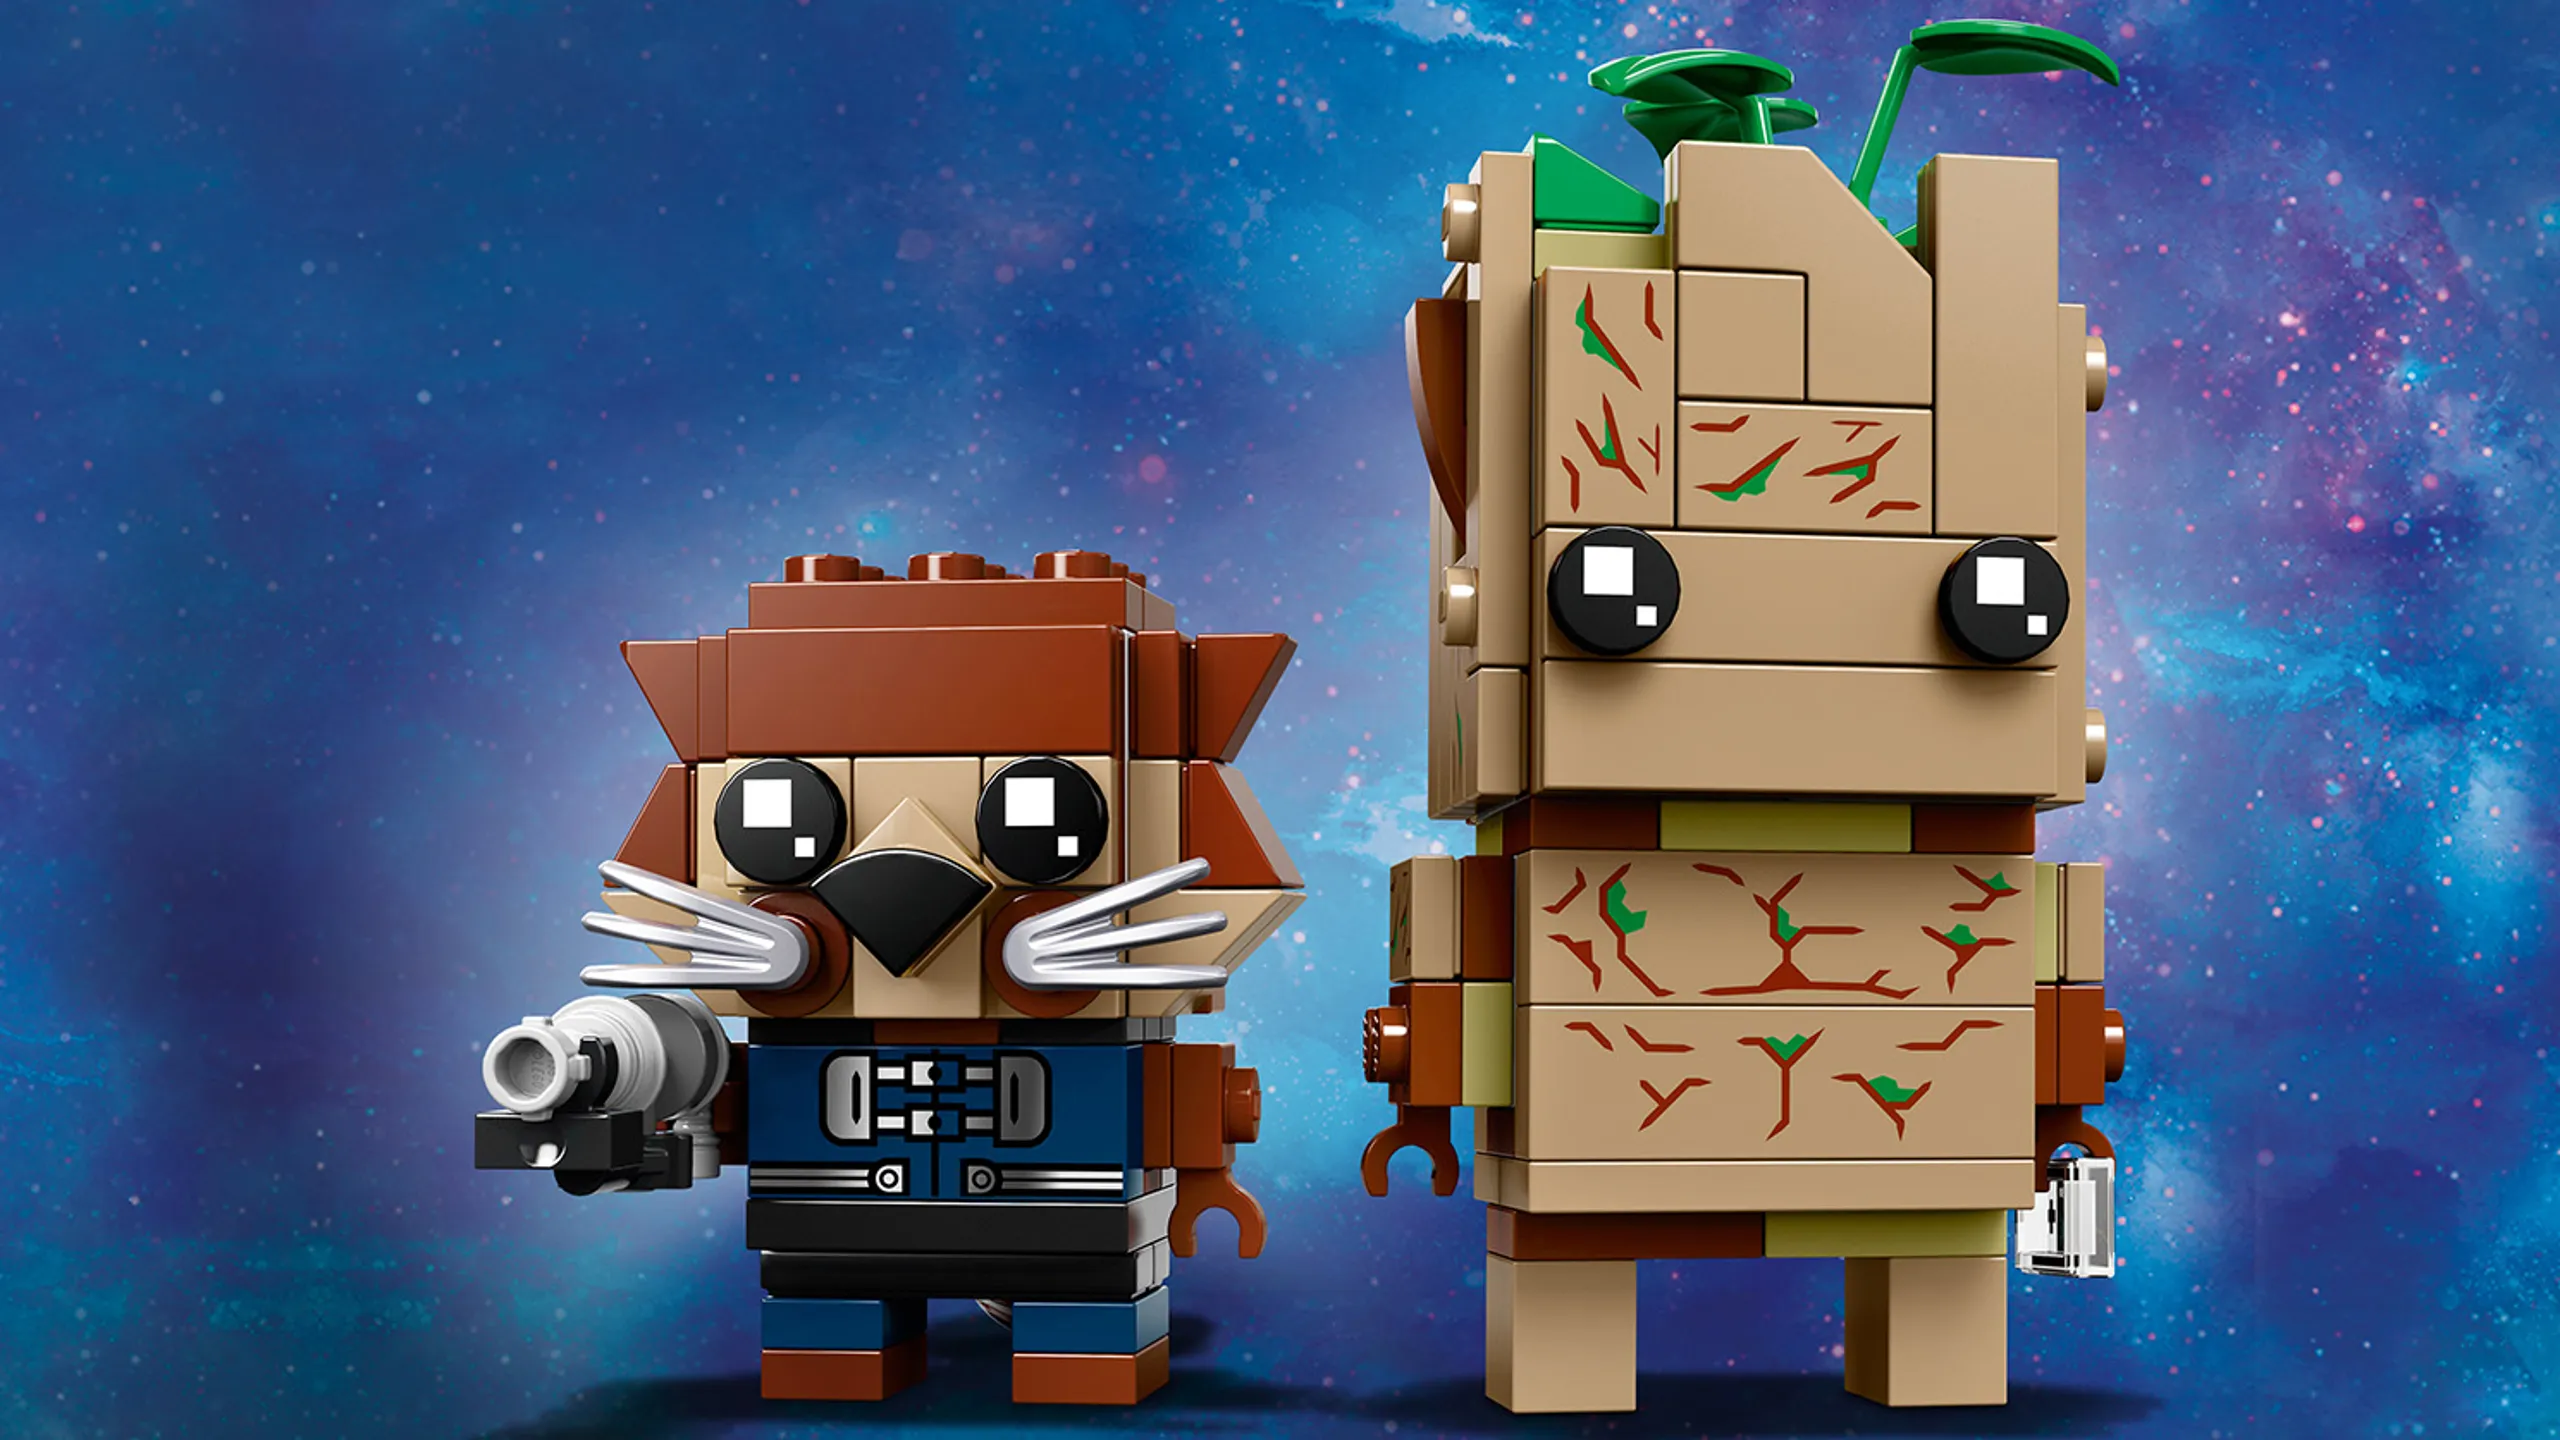 LEGO Brickheadz - 41626 Groot and Rocket - Build LEGO Brickheadz version of these two characters from the movie Avengers: Infinity War and display them on individual baseplates.